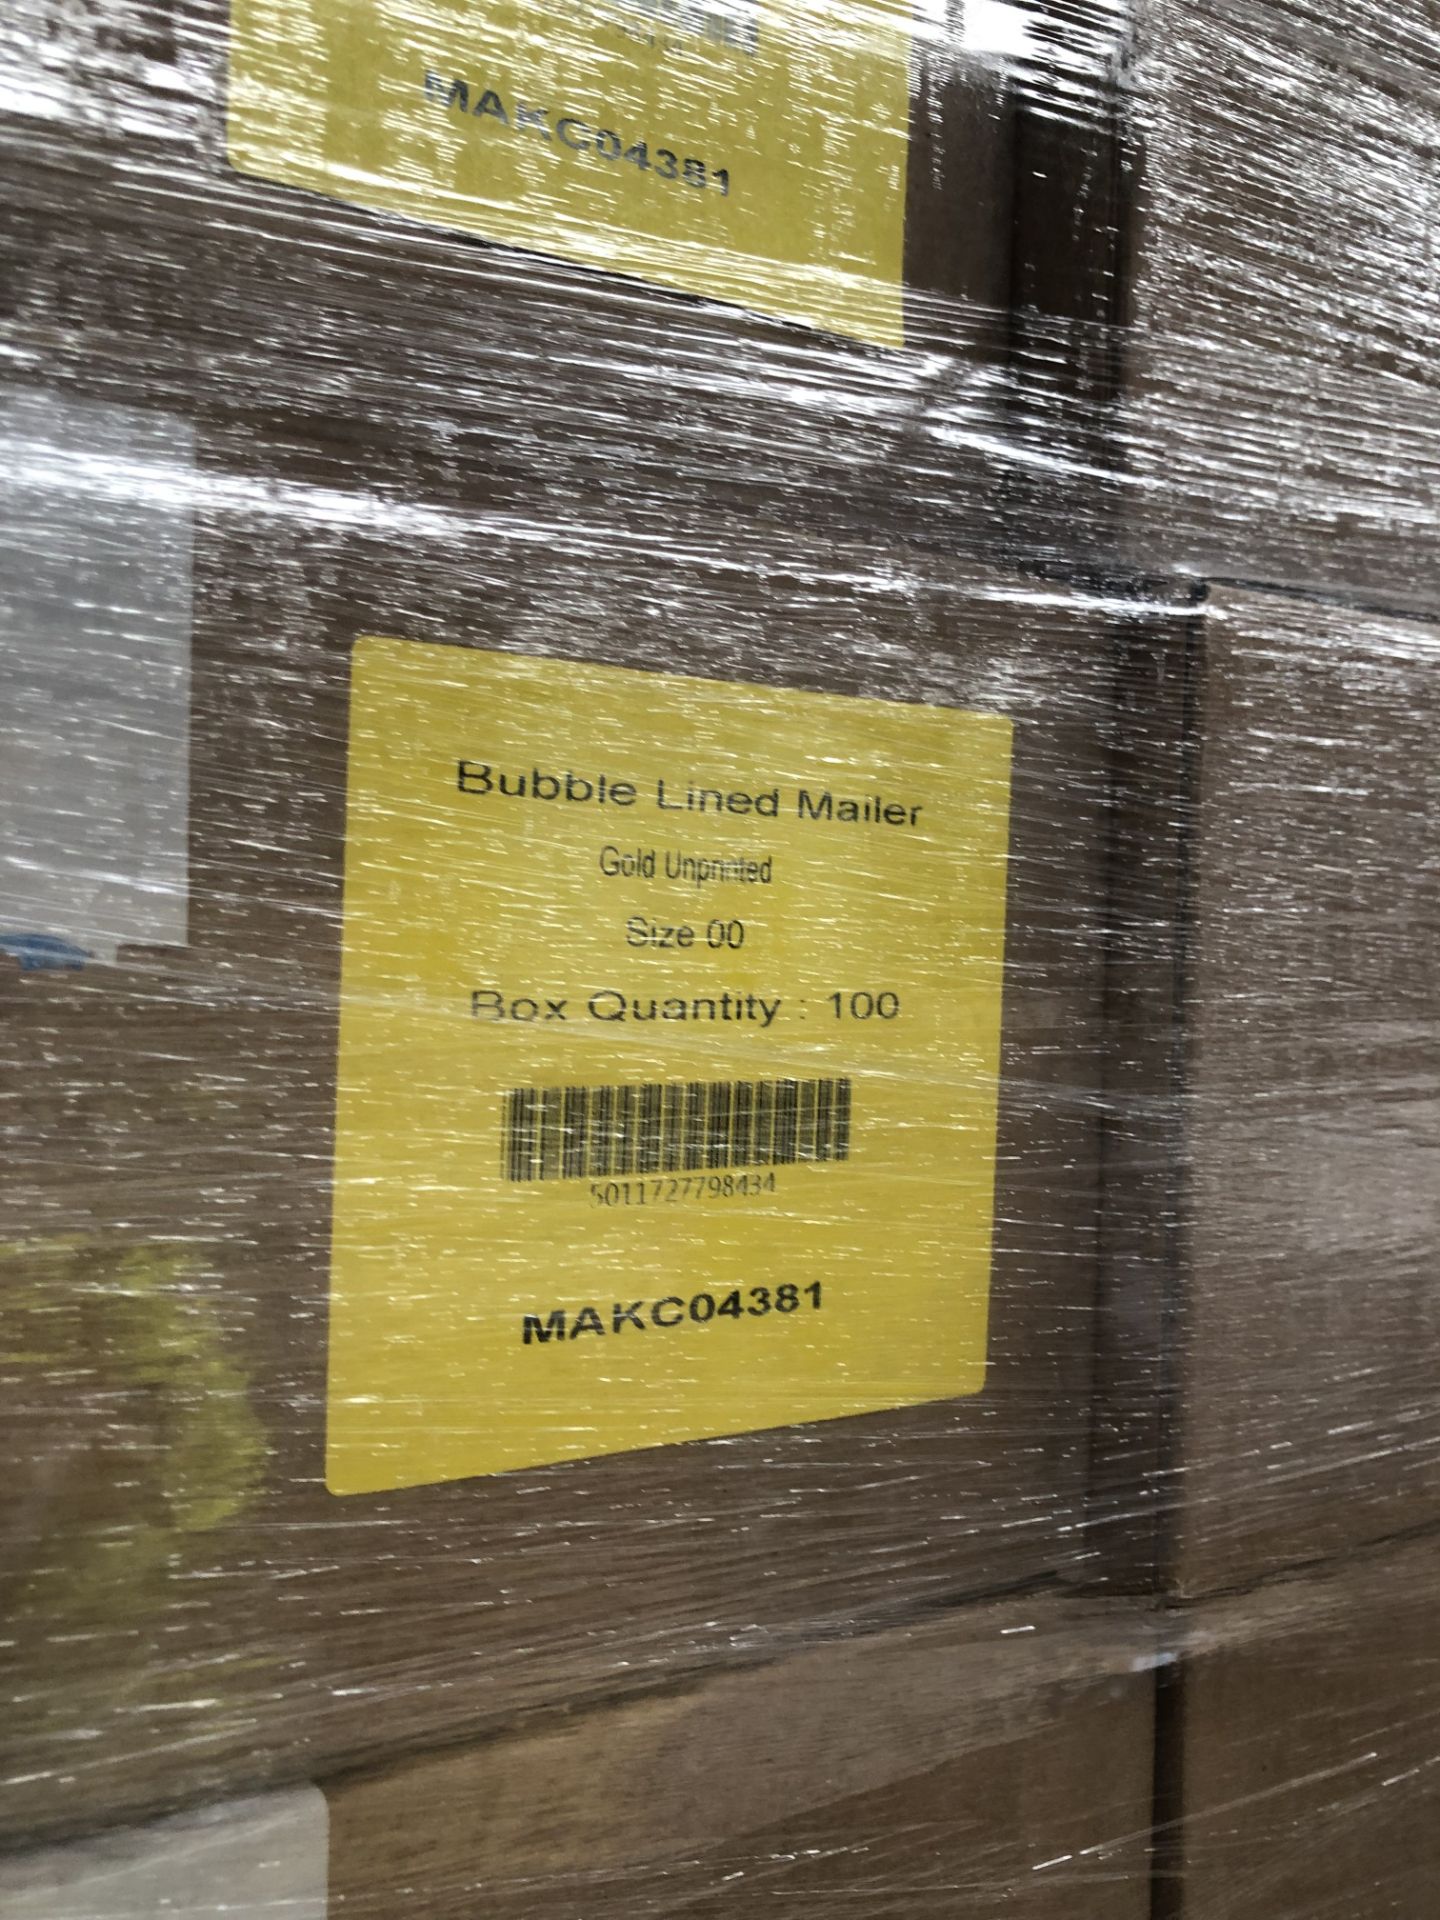 Pallet of Bubble Line Mailer, gold, unprinted box - Image 2 of 2